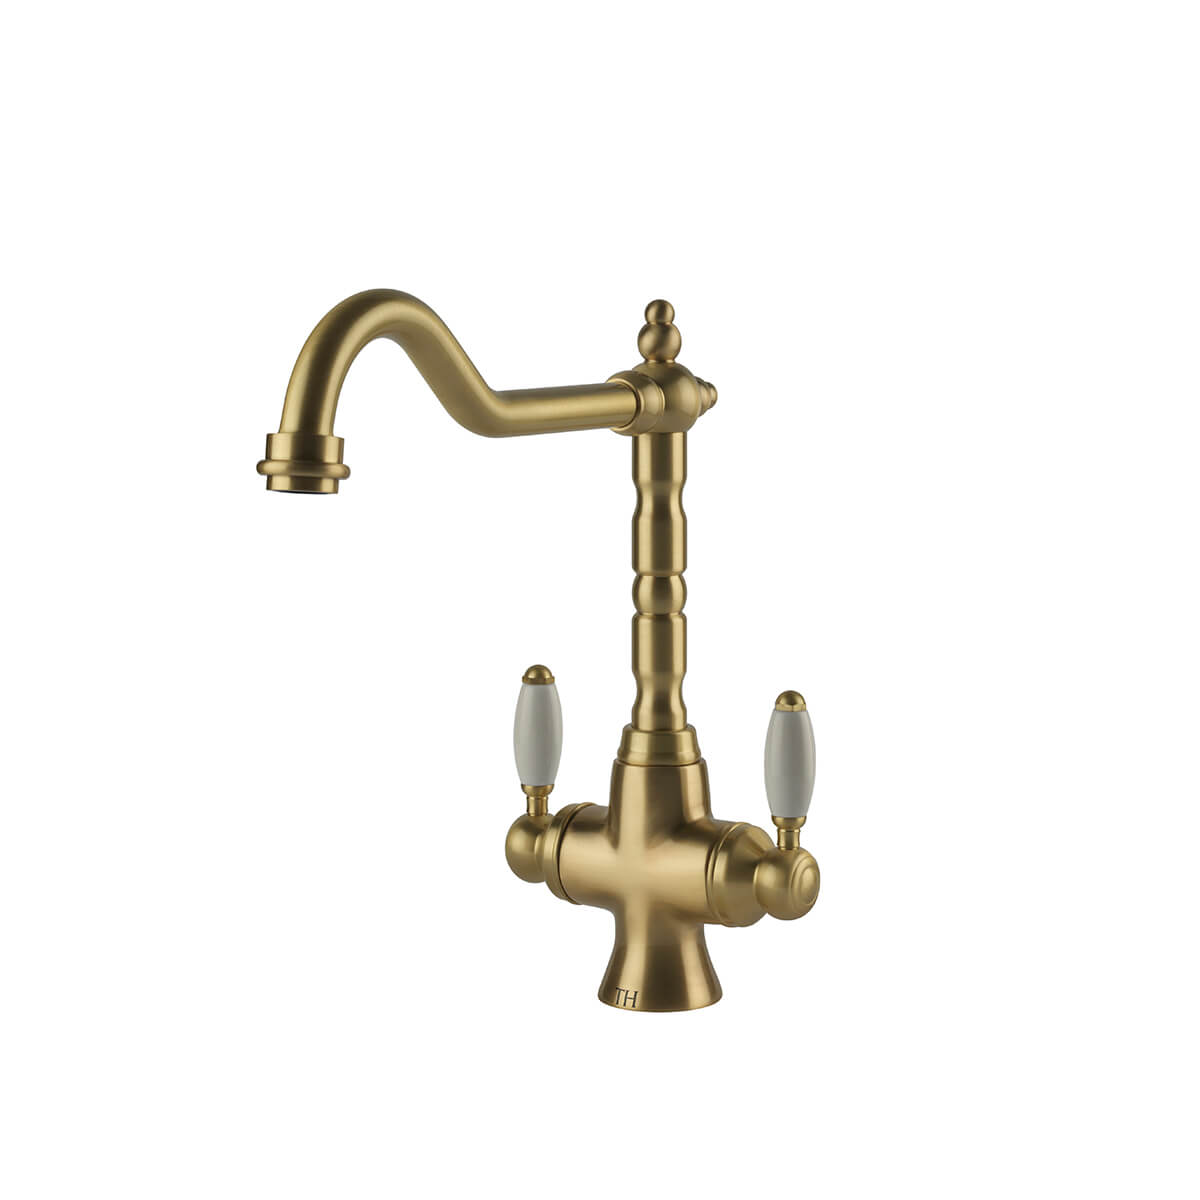 TURNER HASTINGS PROVIDENCE DOUBLE SINK MIXER 291MM BRUSHED BRASS (CERAMIC HANDLE)